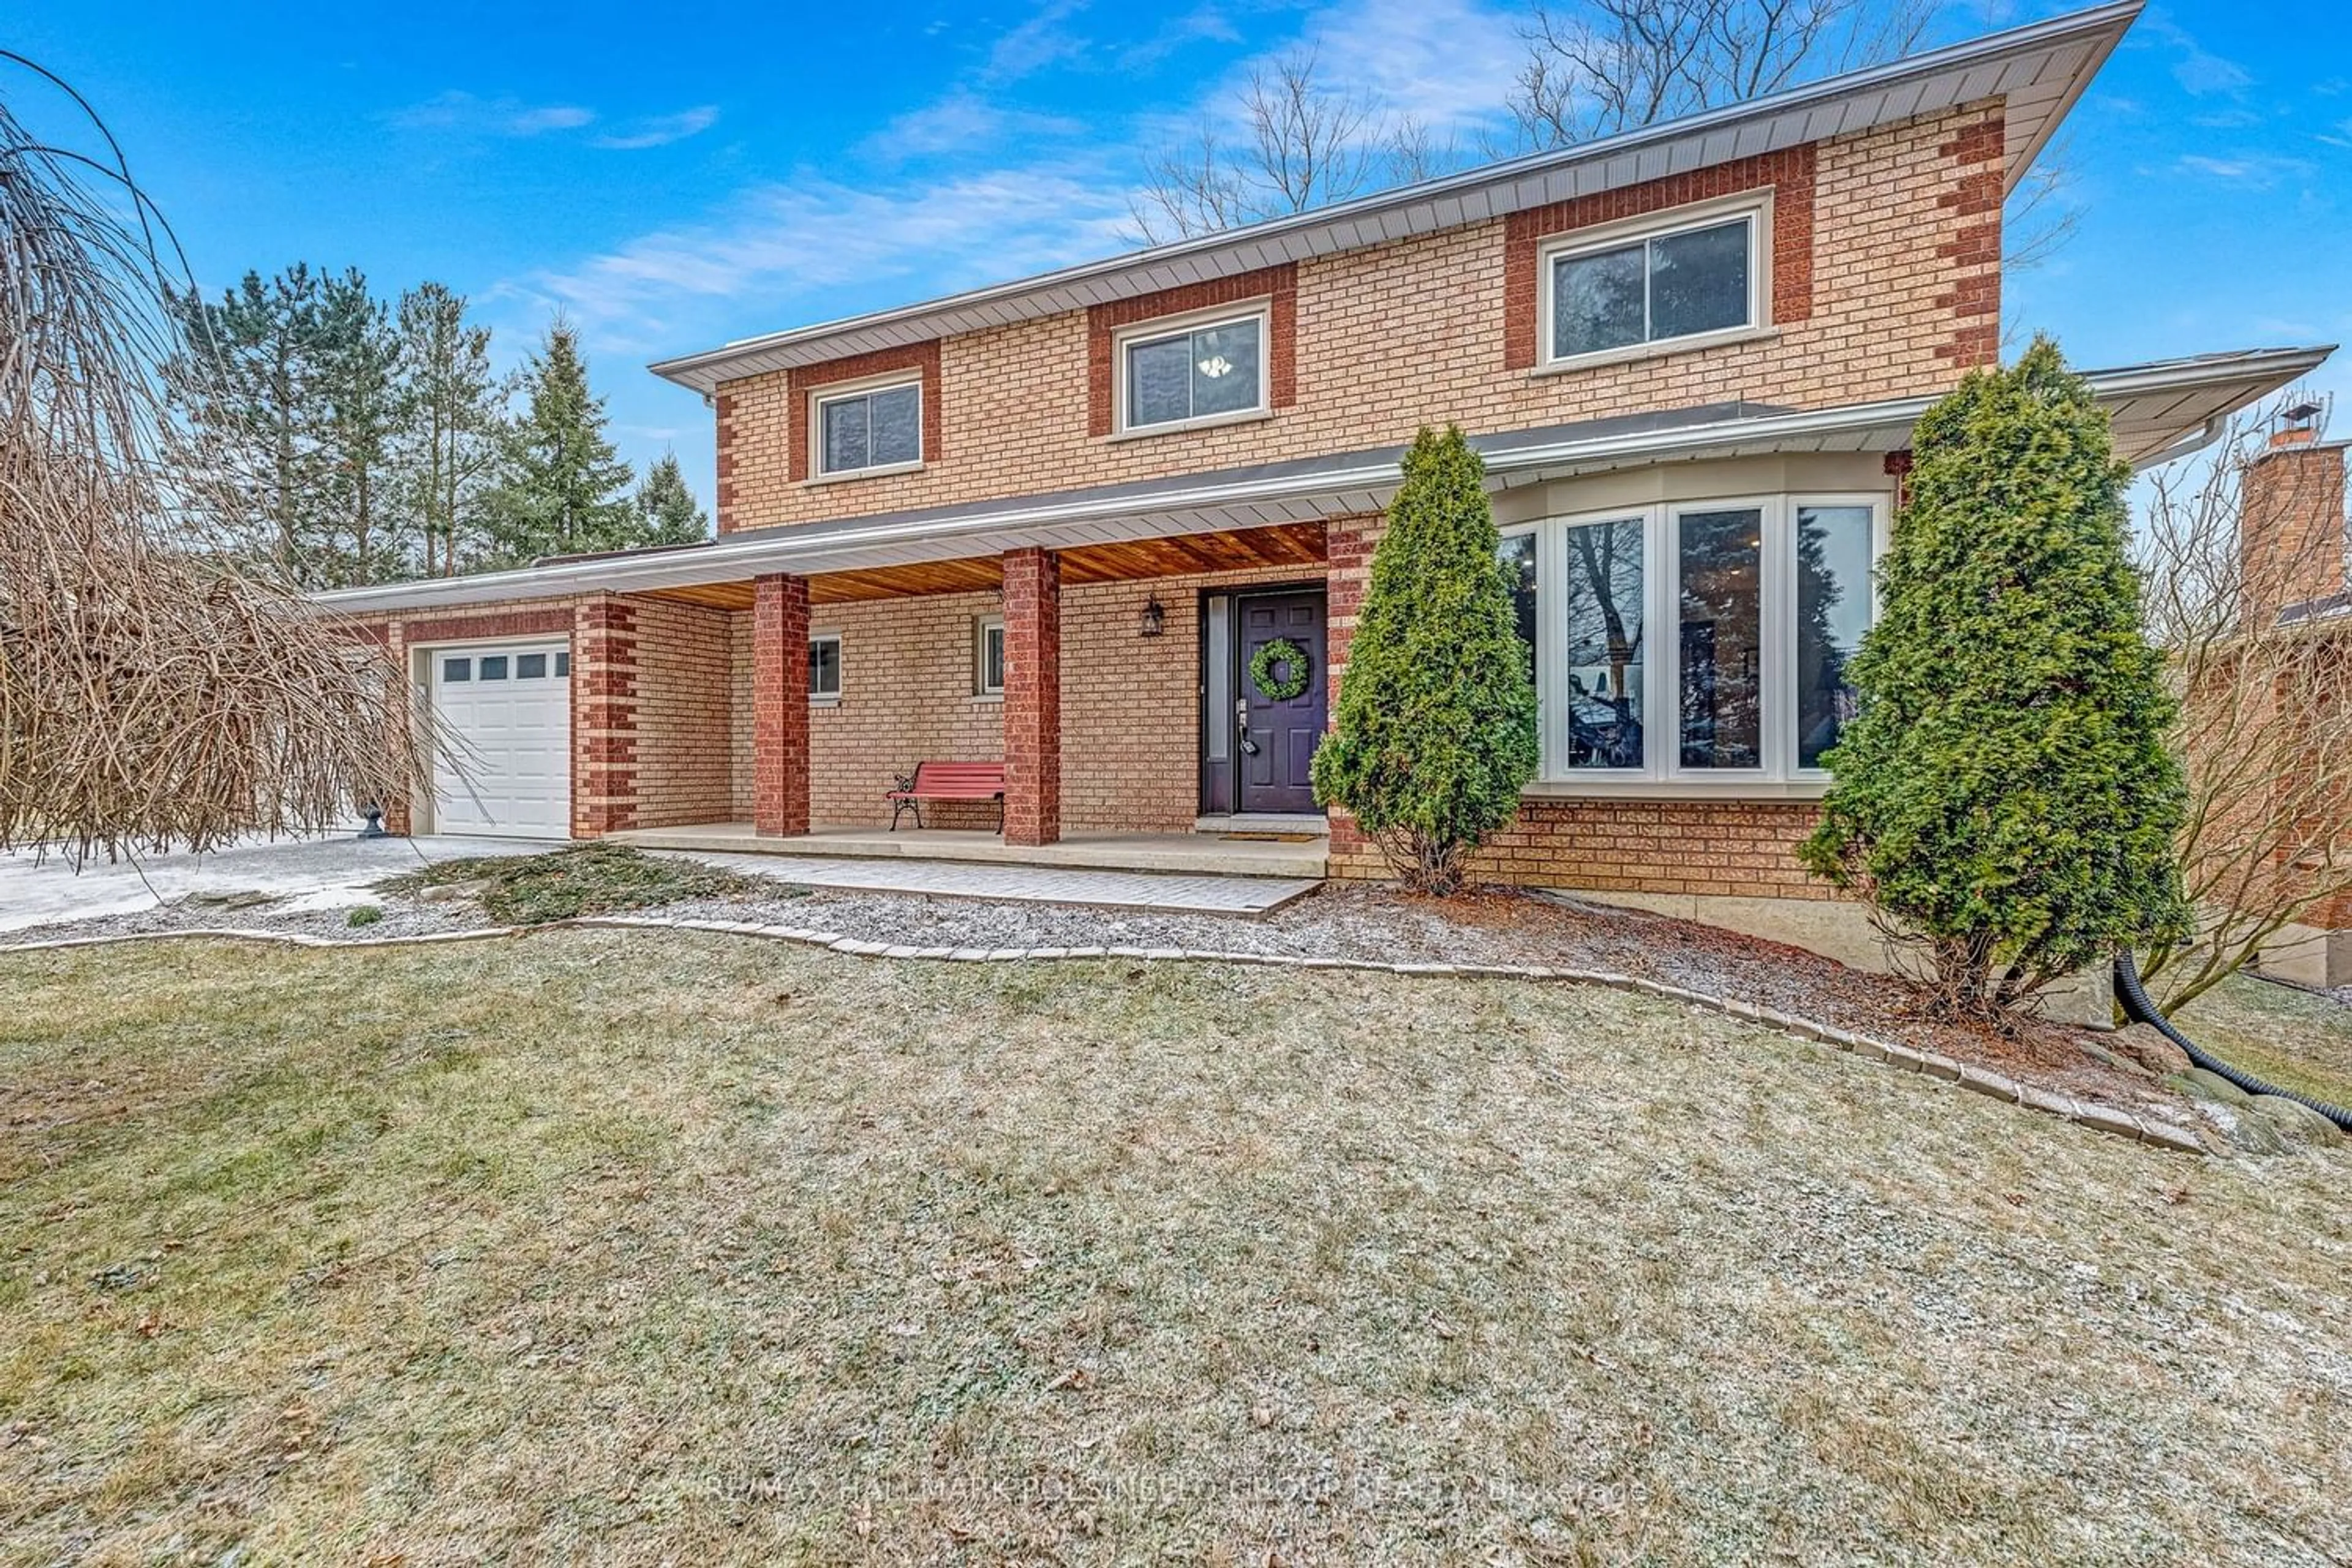 Home with brick exterior material for 90 Samuel Lount Rd, East Gwillimbury Ontario L0G 1H0